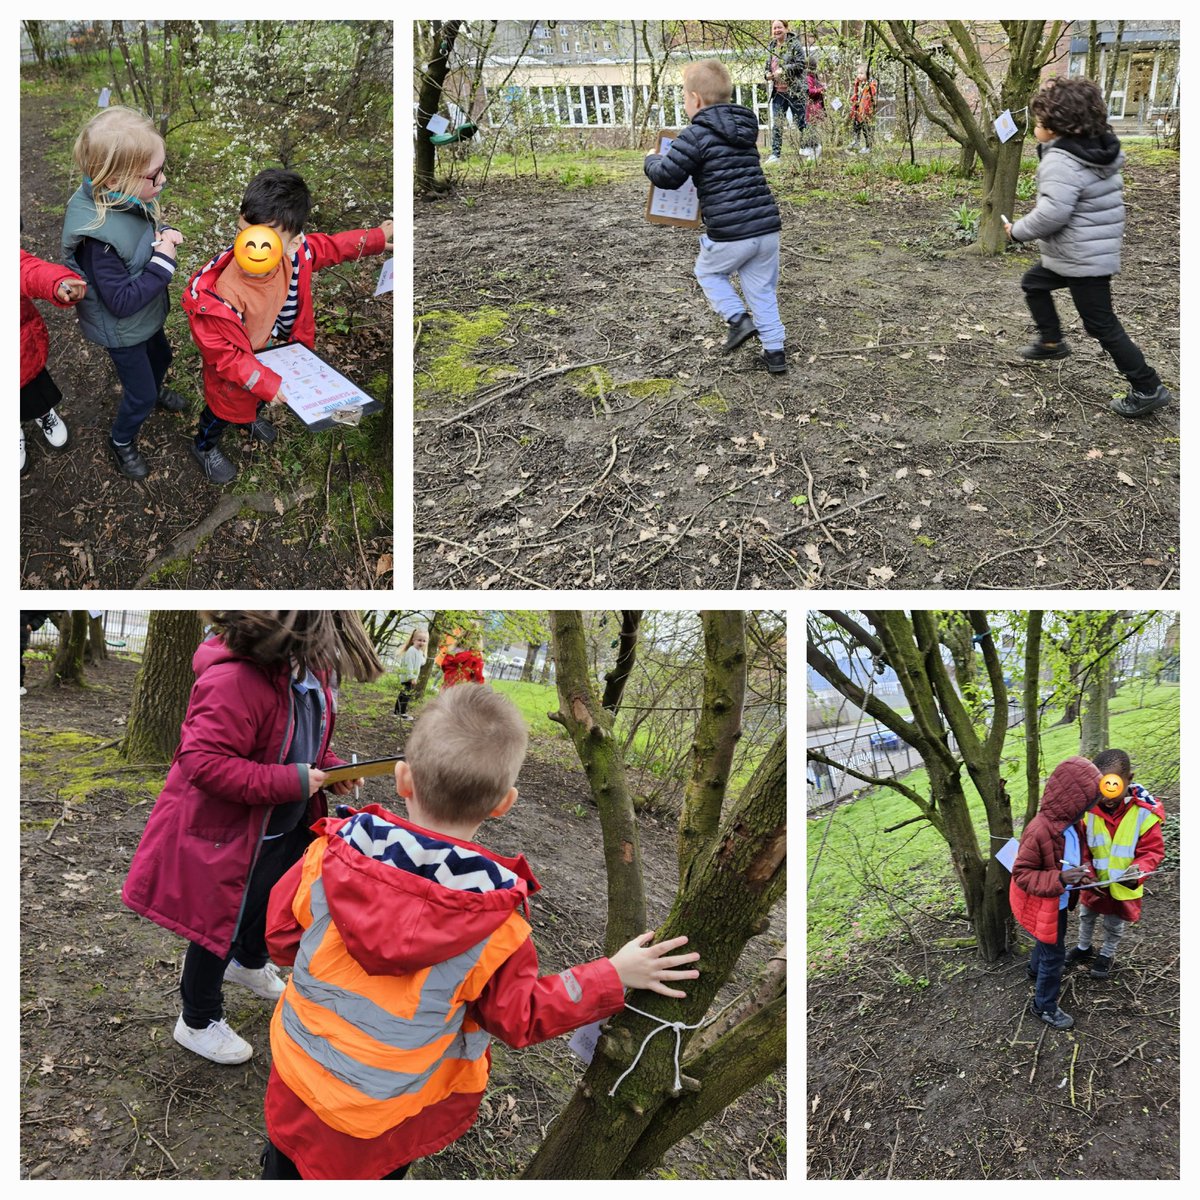 Our spring transition brought us spring activities and an Easter hunt in our forest working as a team #nurserytop1transitions #makingfriends #teamwork #nurture